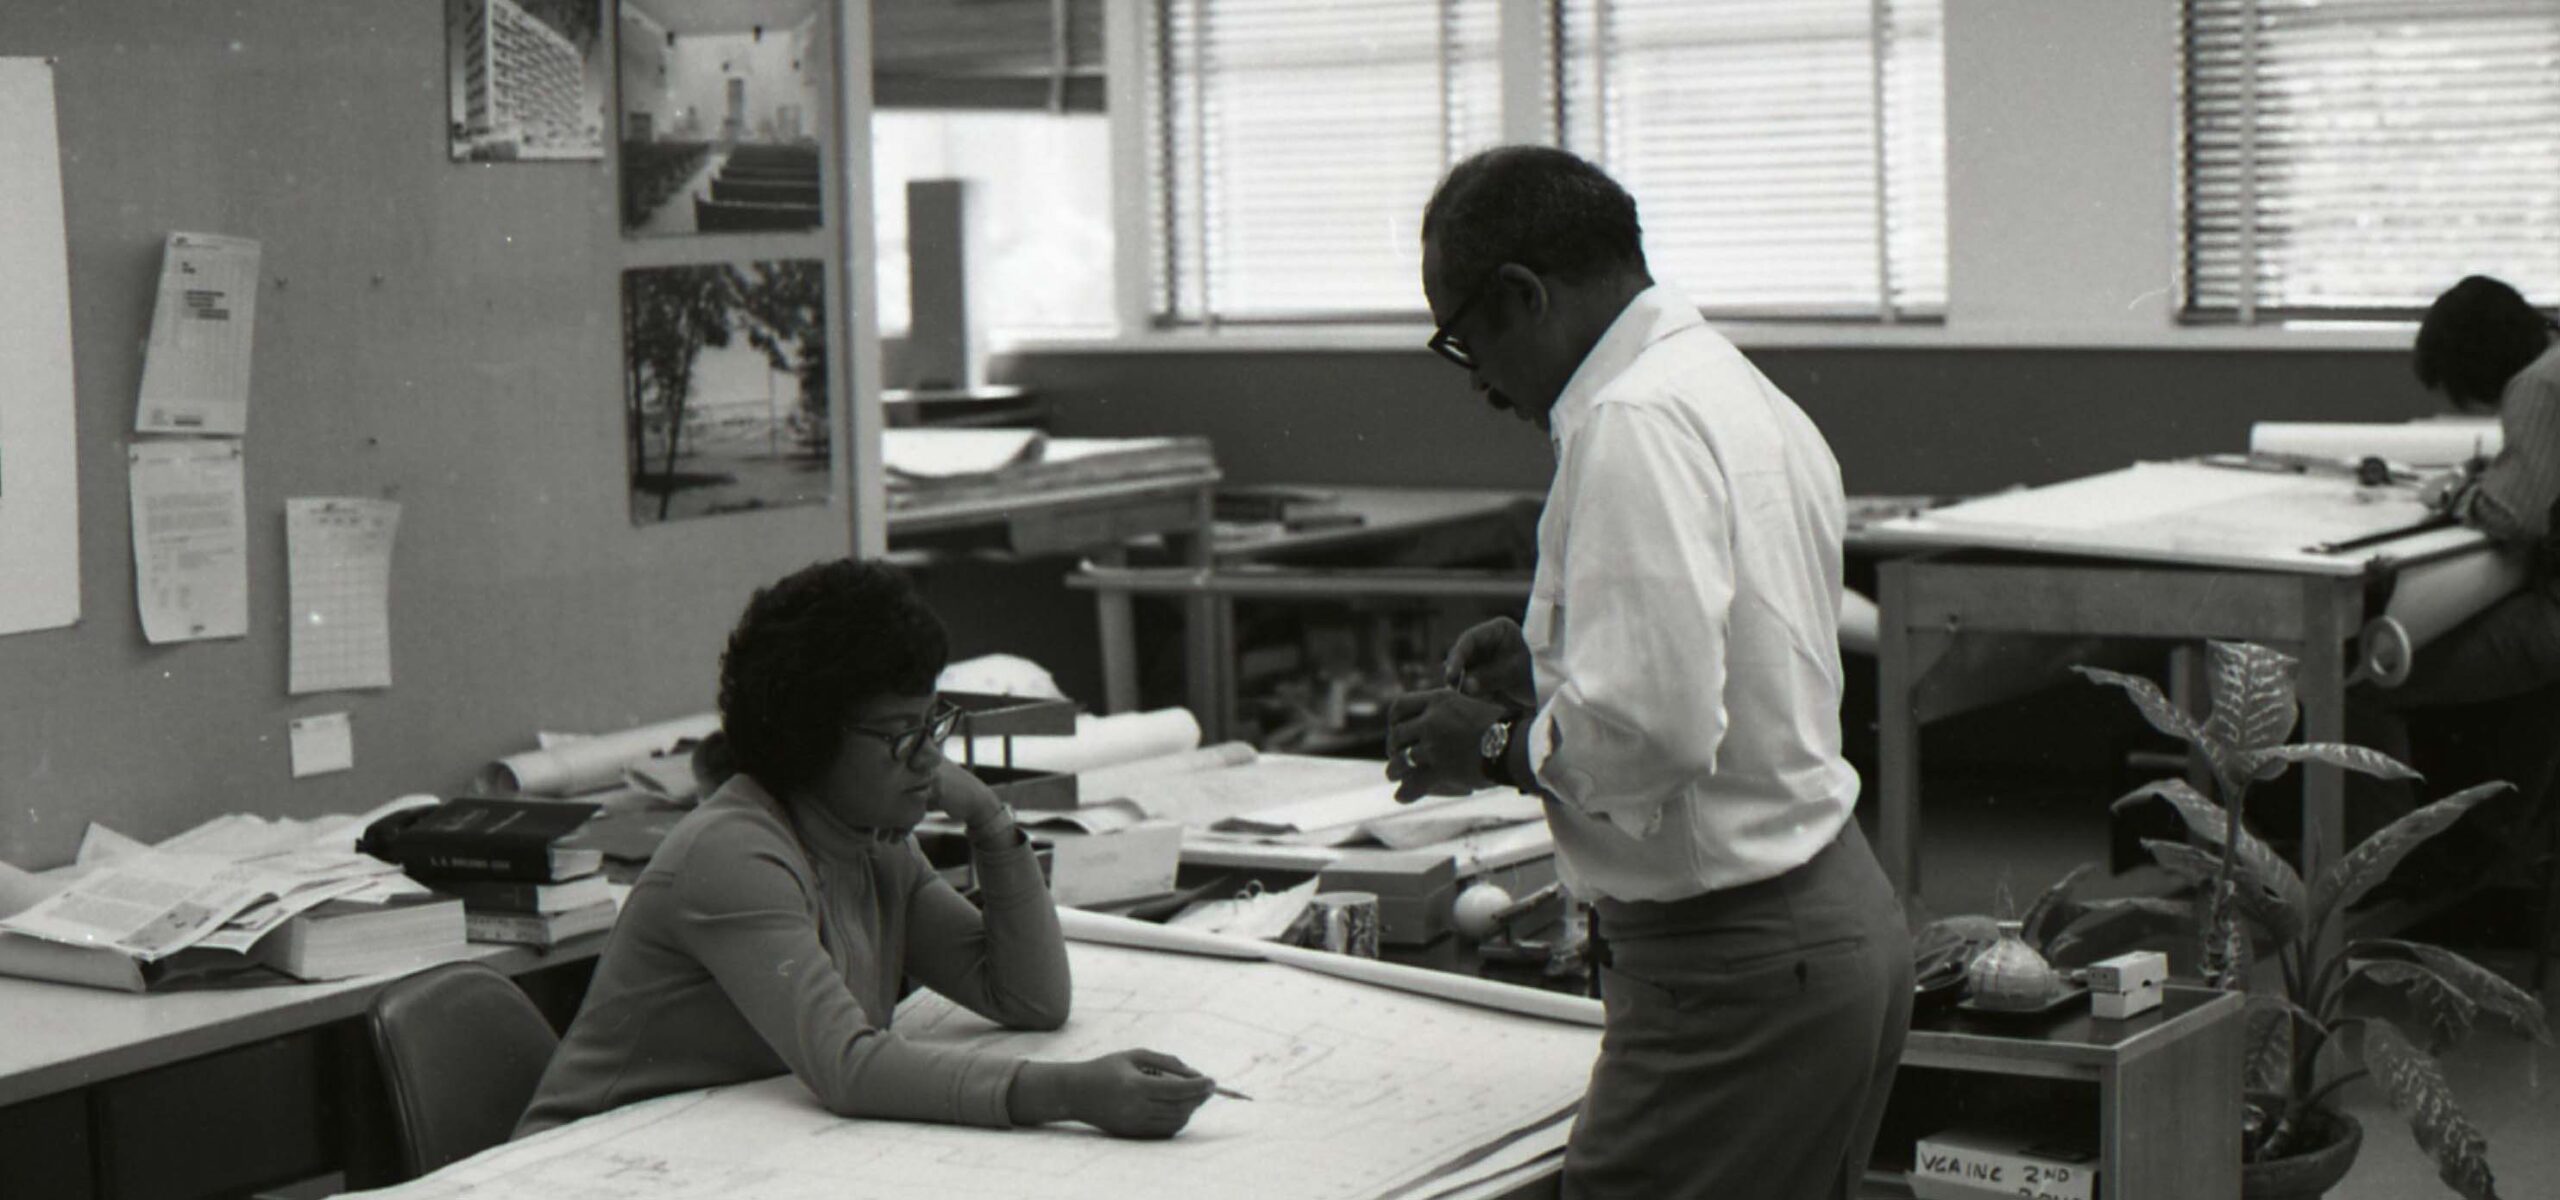 Two African-American architects looking at plans at a desk.